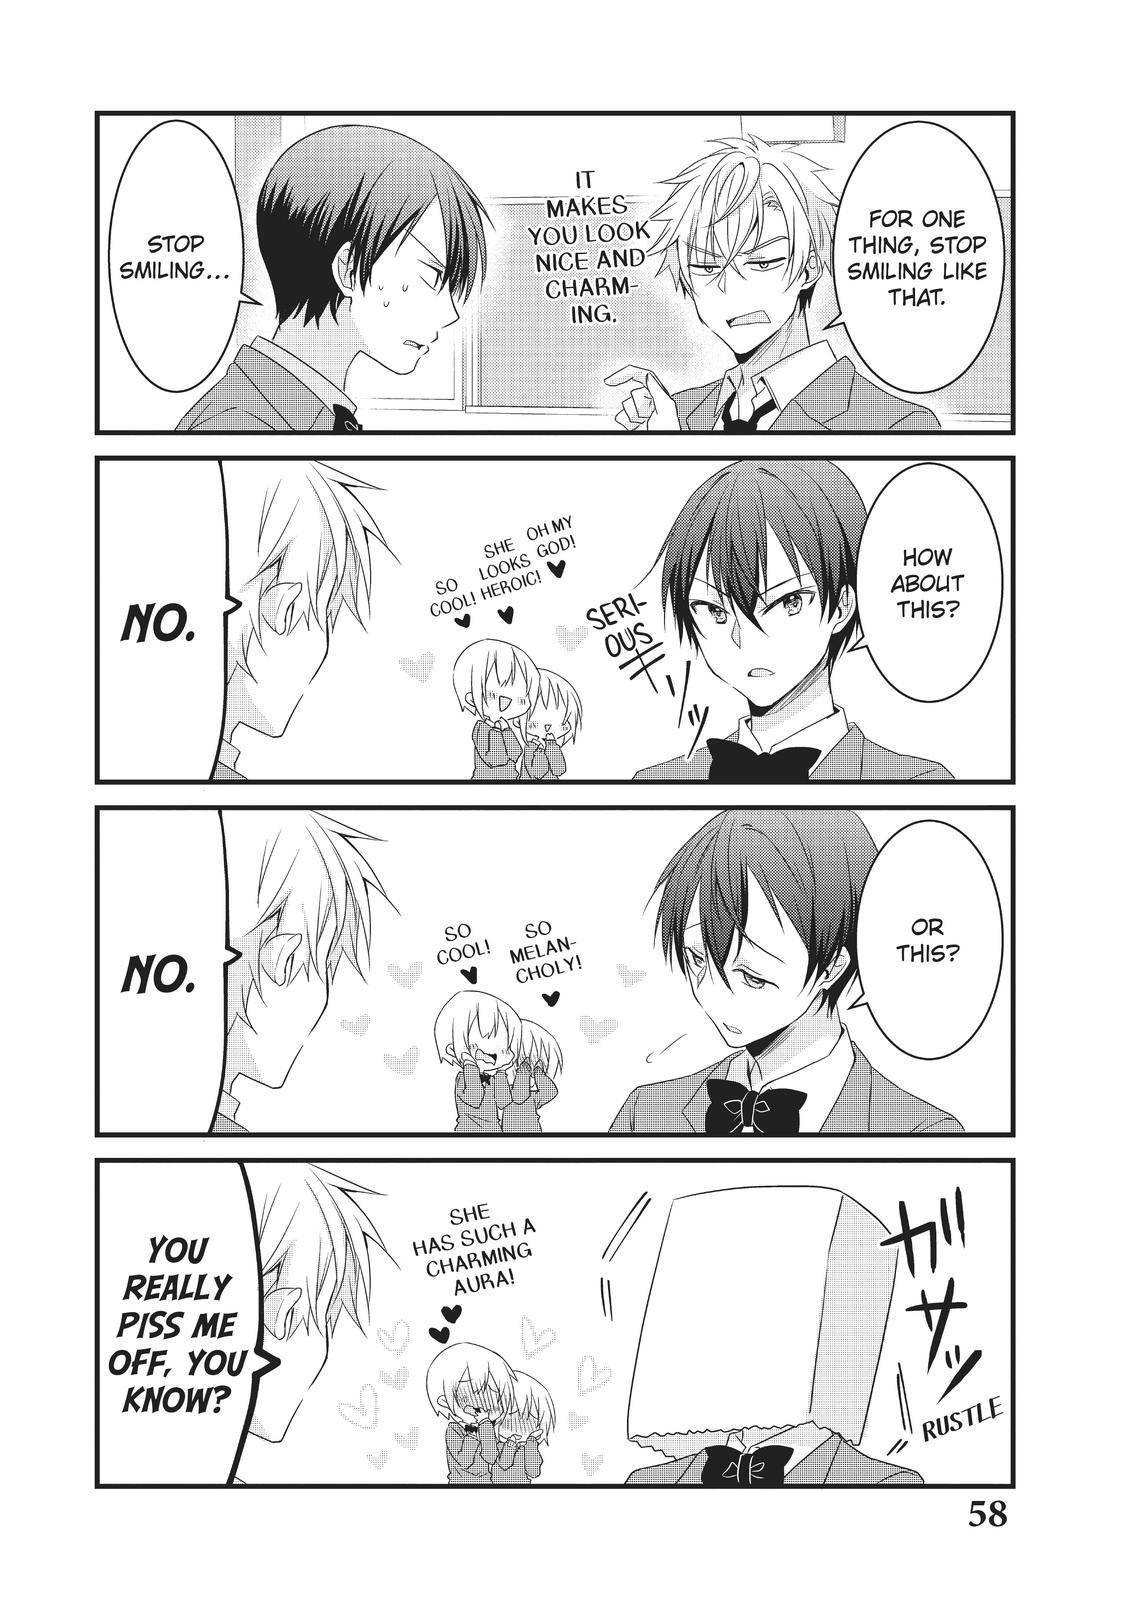 The Story Of The Girl I Like Being Too Ikemen - chapter 5 - #4